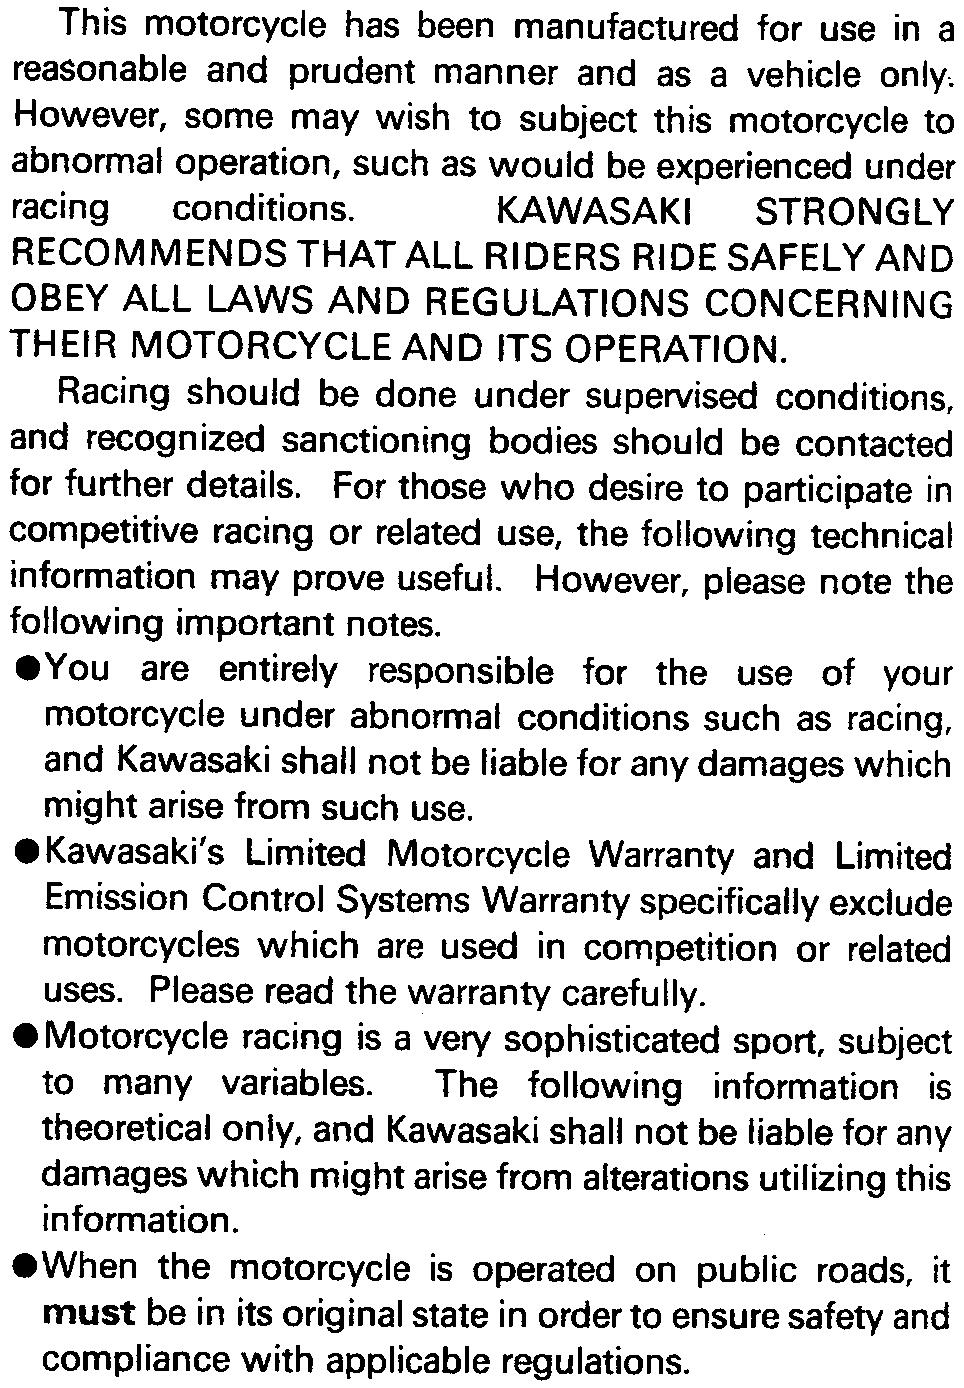 KAWASAKI STRONGLY RECOMMENDS THAT ALL RIDERS RIDE SAFELY AND OBEY ALL LAWS AND REGULATIONS CONCERNING THEIR MOTORCYCLE AND ITS OPERATION.